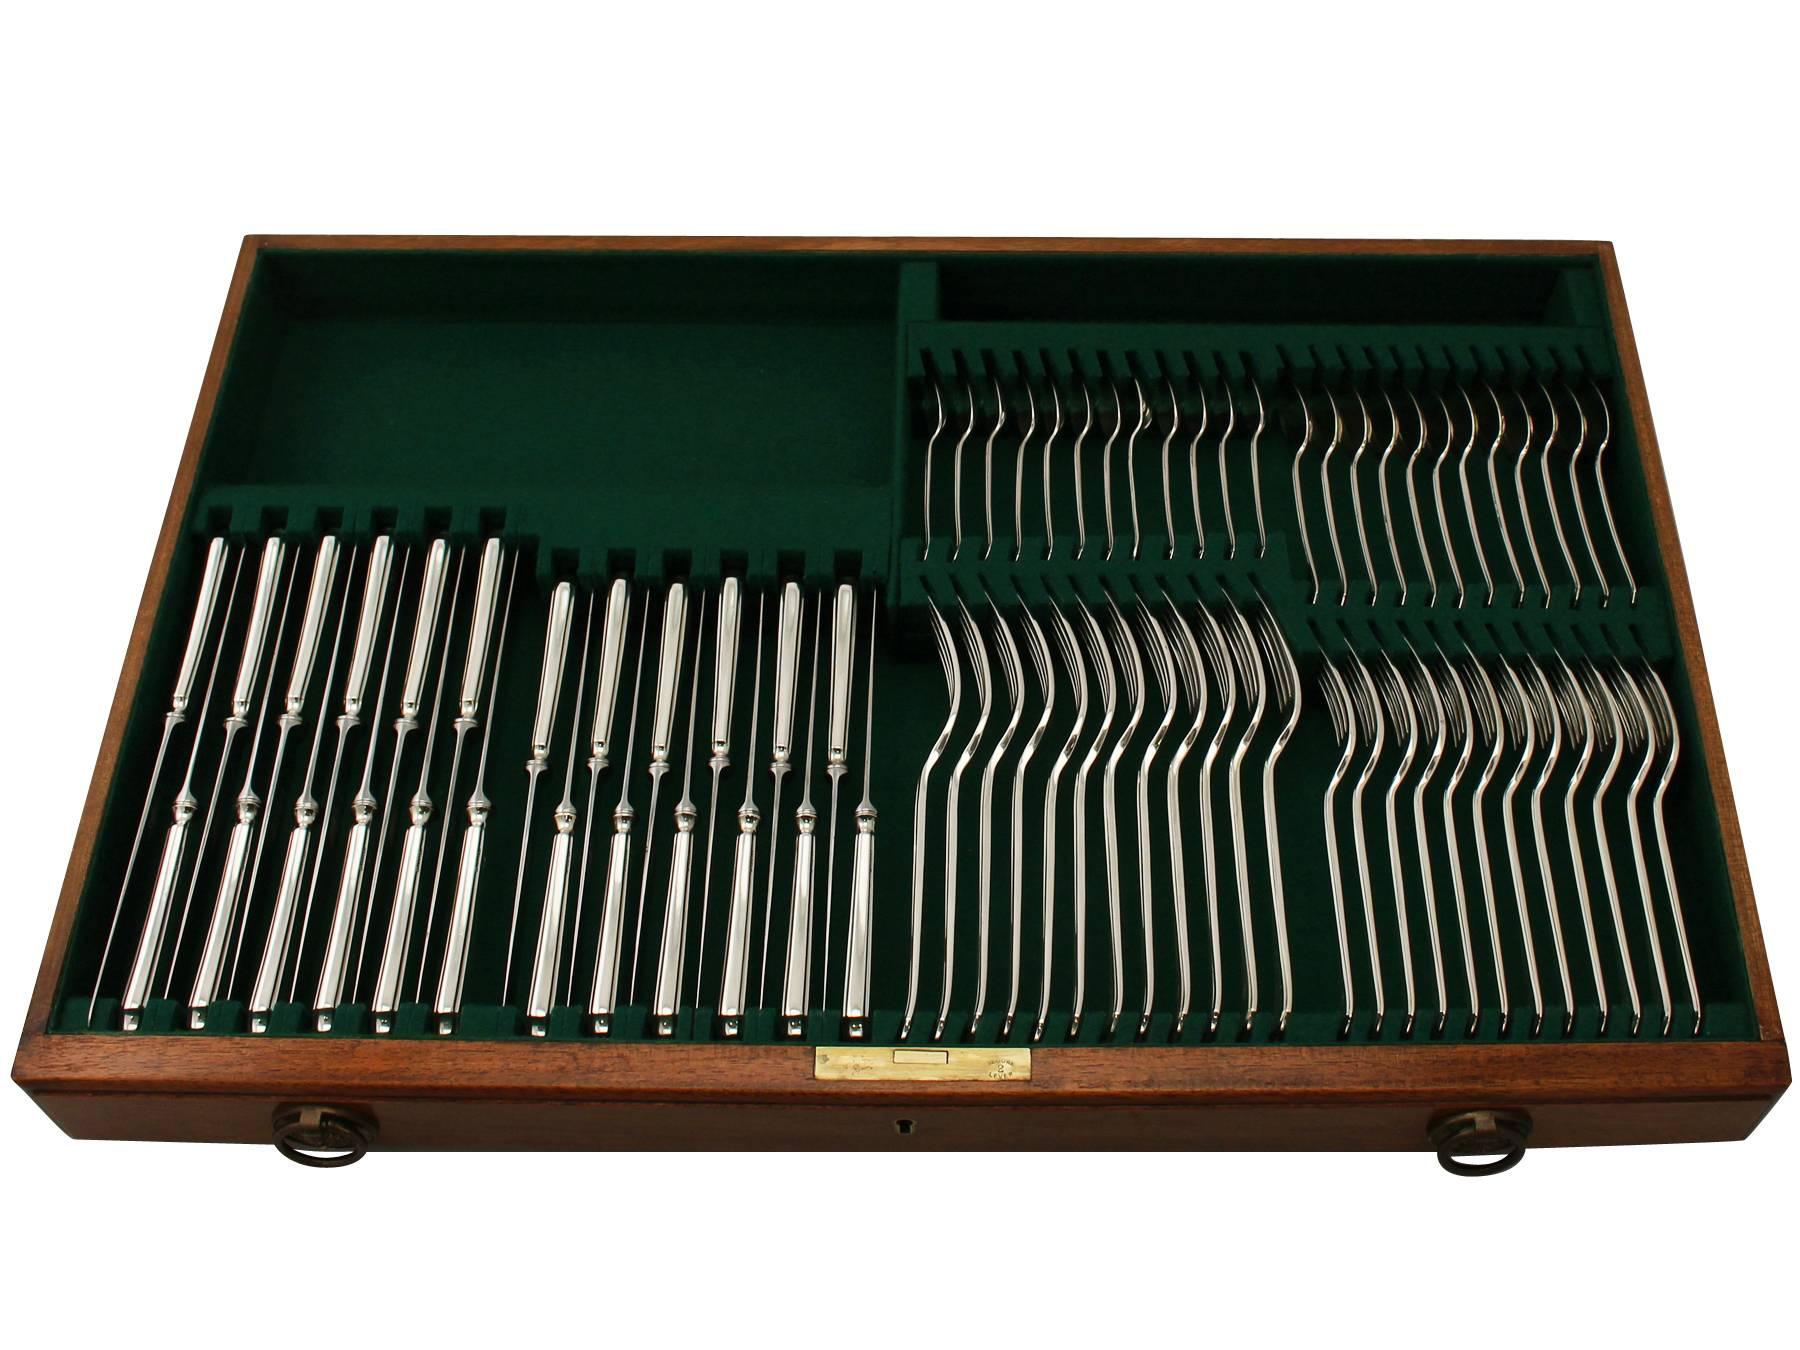 A magnificent, fine and impressive, comprehensive antique George V English sterling silver straight Pembury pattern flatware set / service for twelve persons made in the Art Deco style; an addition to our canteen of cutlery collection

The pieces